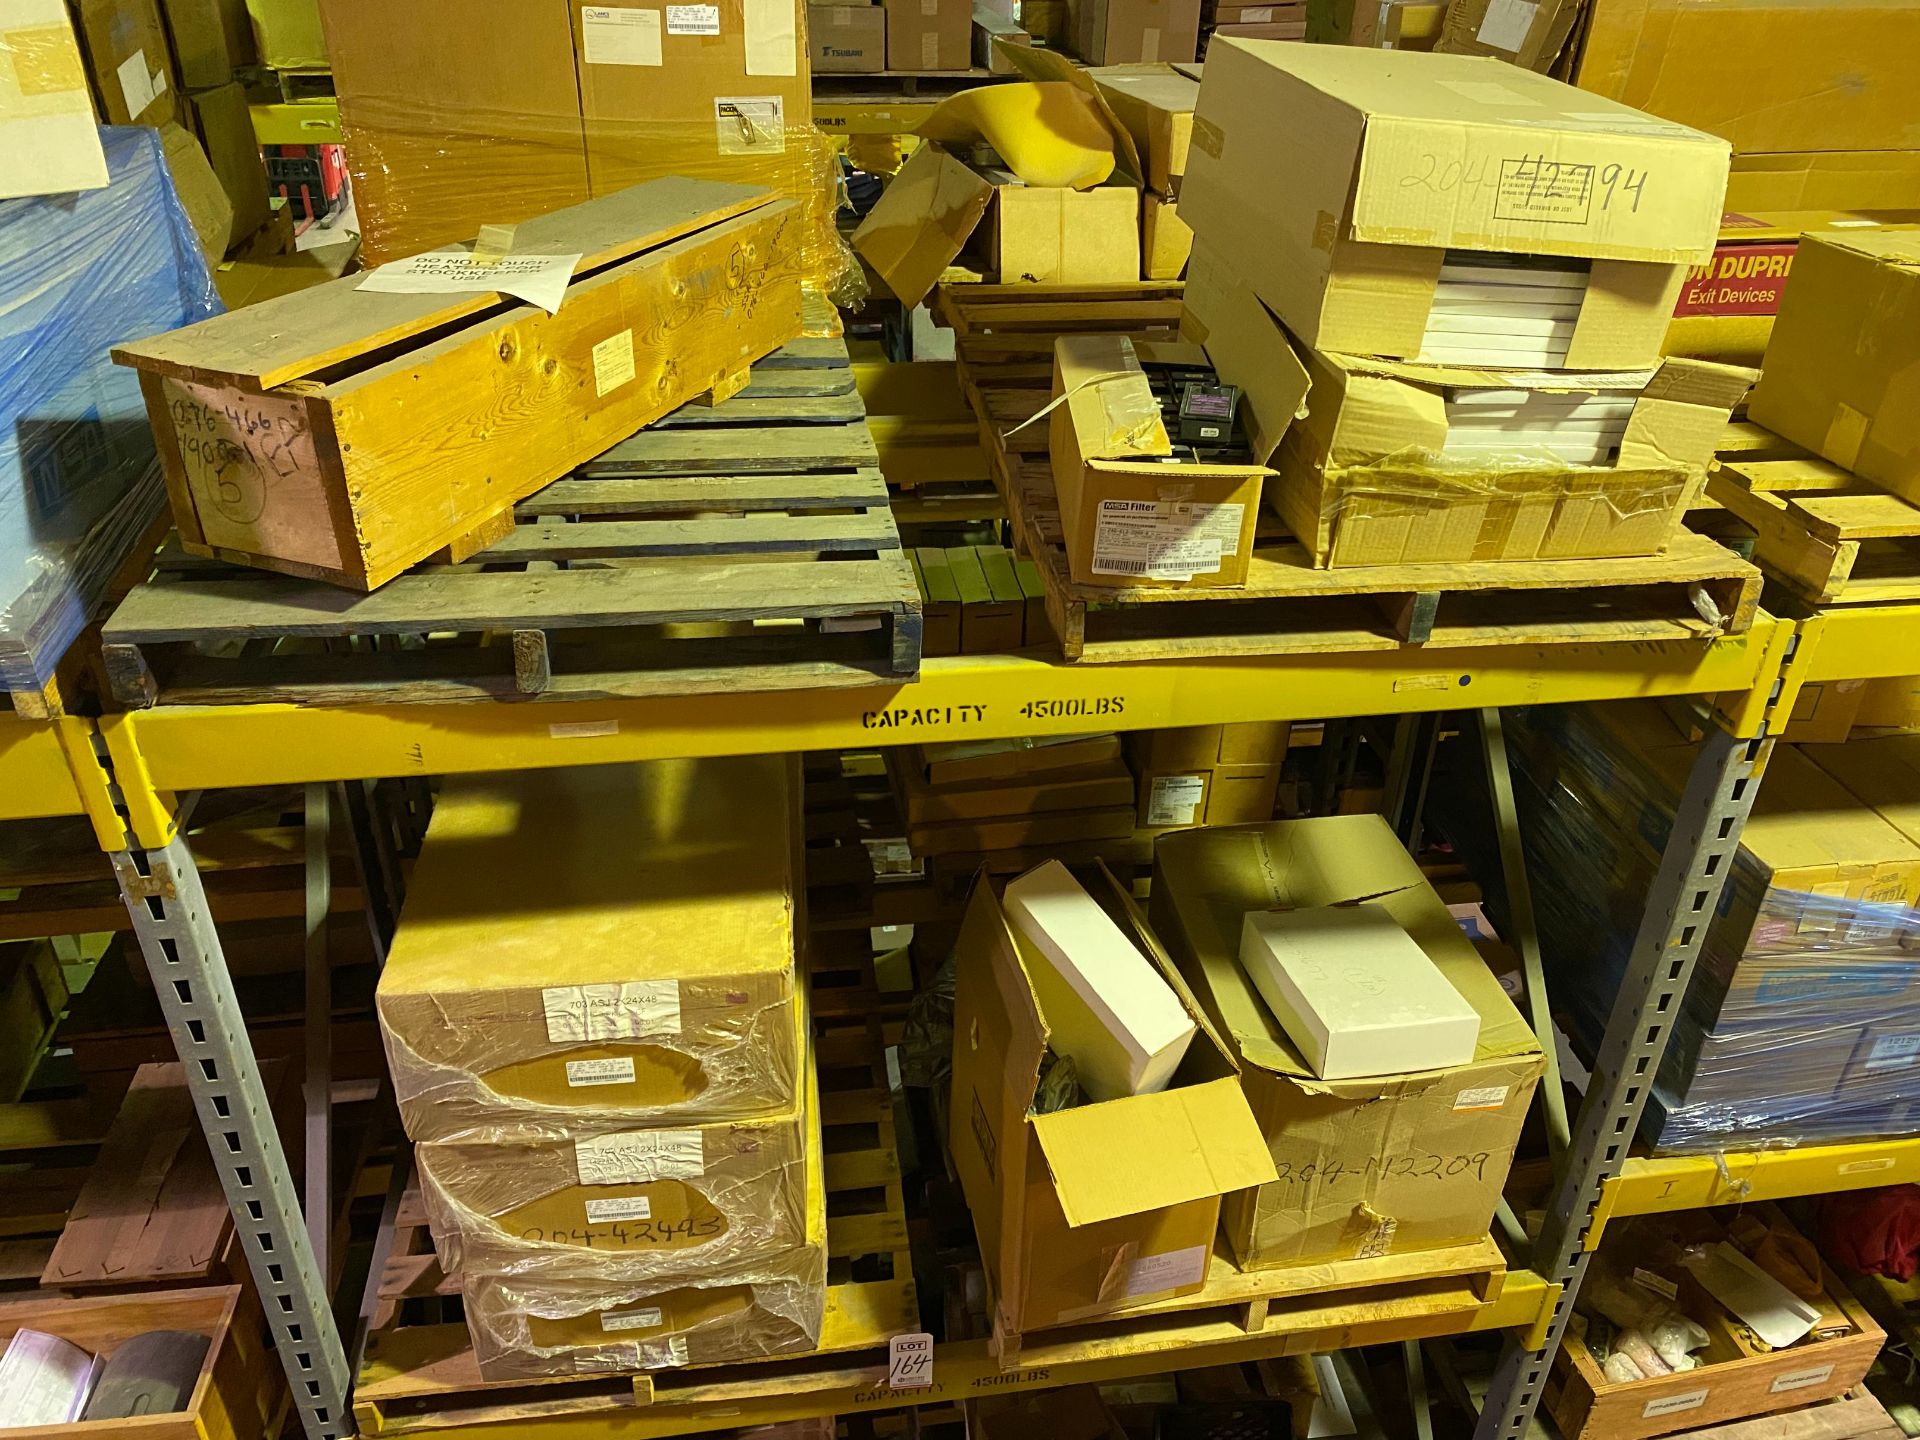 (8) PALLETS OF MAINTENANCE & REPAIR PARTS ON THE FLOOR AND (3) PALLET RACK SHELVES (NO SHELVING) - Image 2 of 2